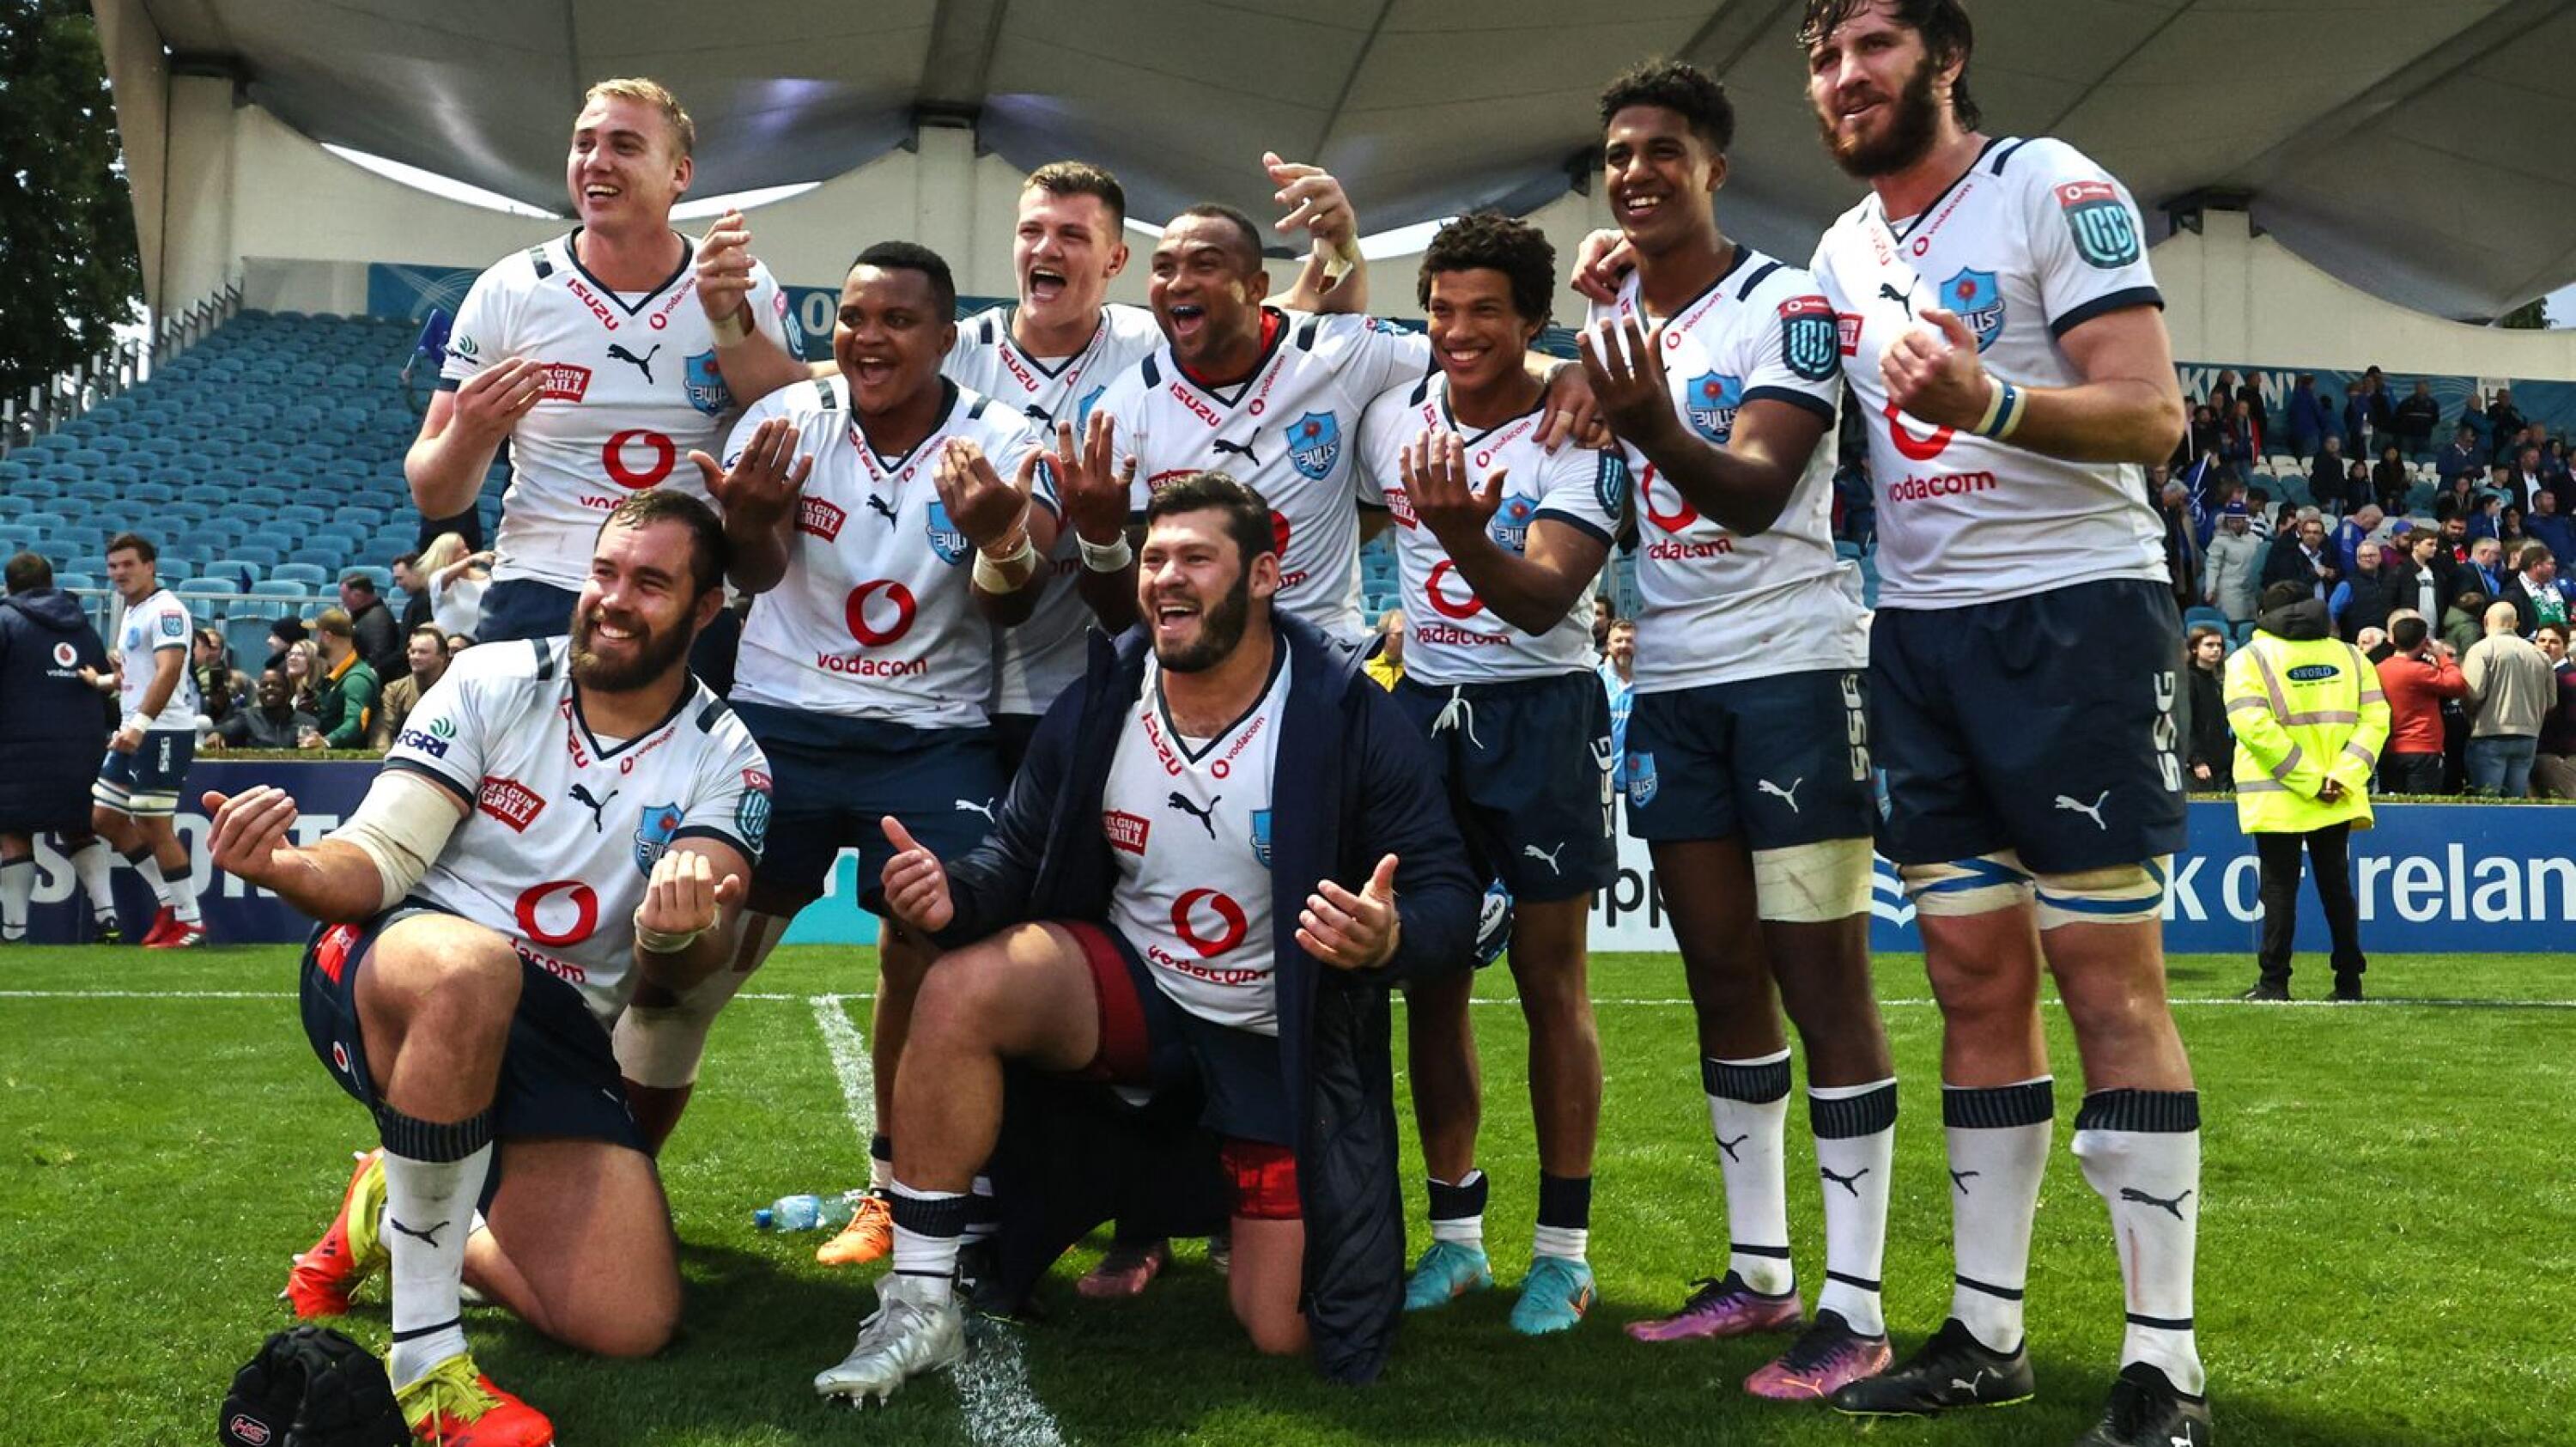 The Vodacom Bulls celebrate winning their United Rugby Championship semi-final against Leinster in Dublin